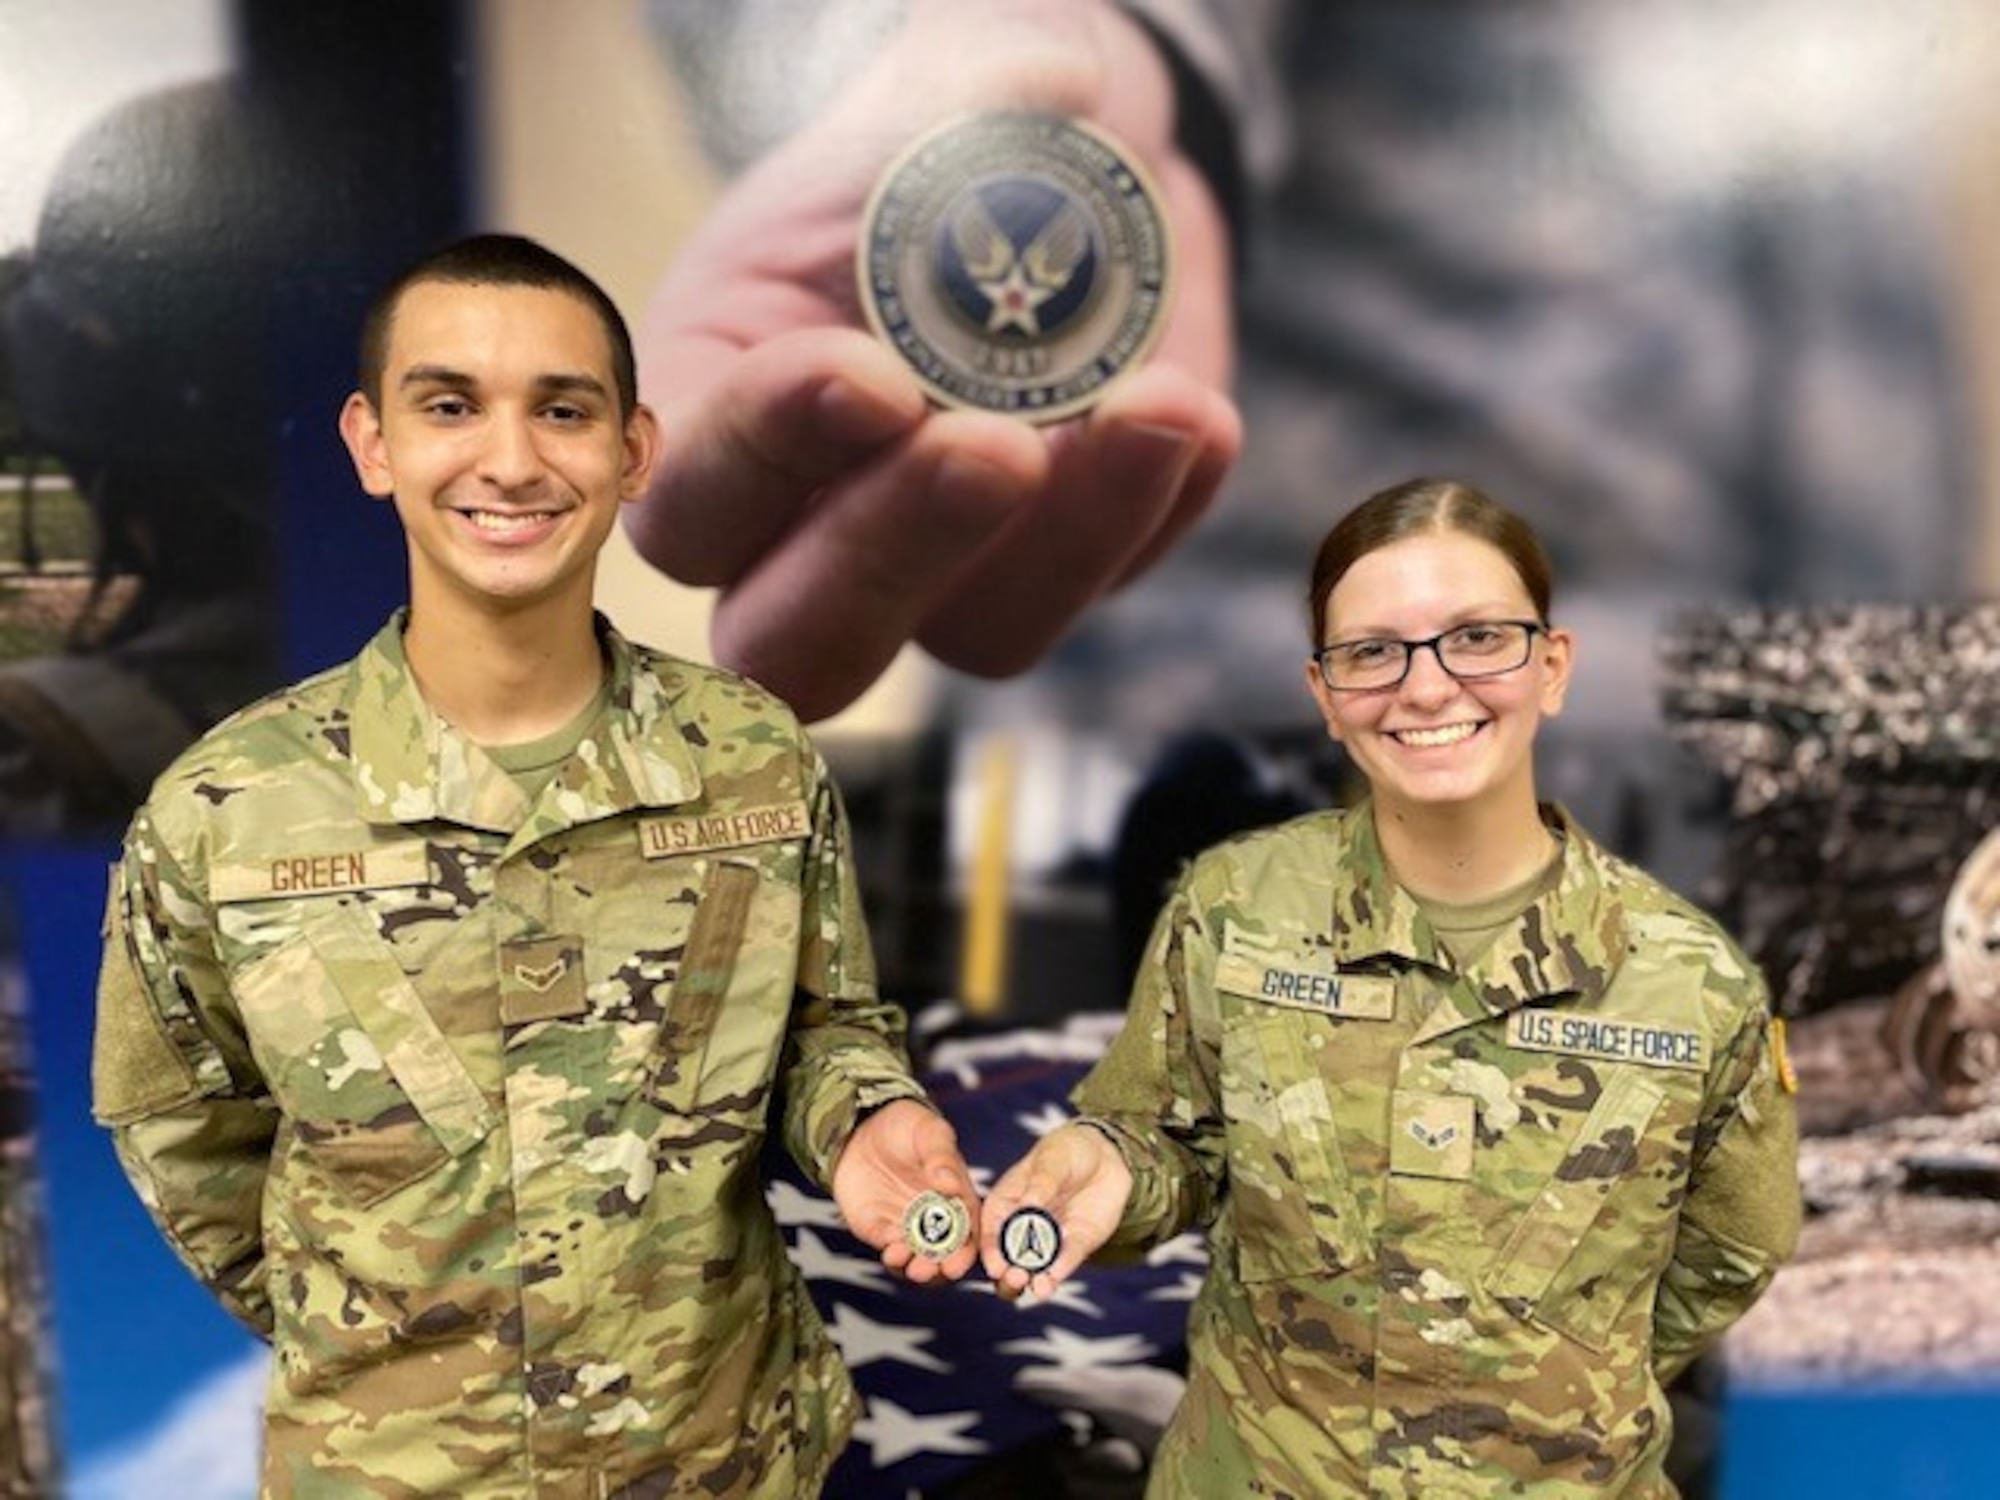 Air Force Airman and Space Force Guardian show their coins after graduation.